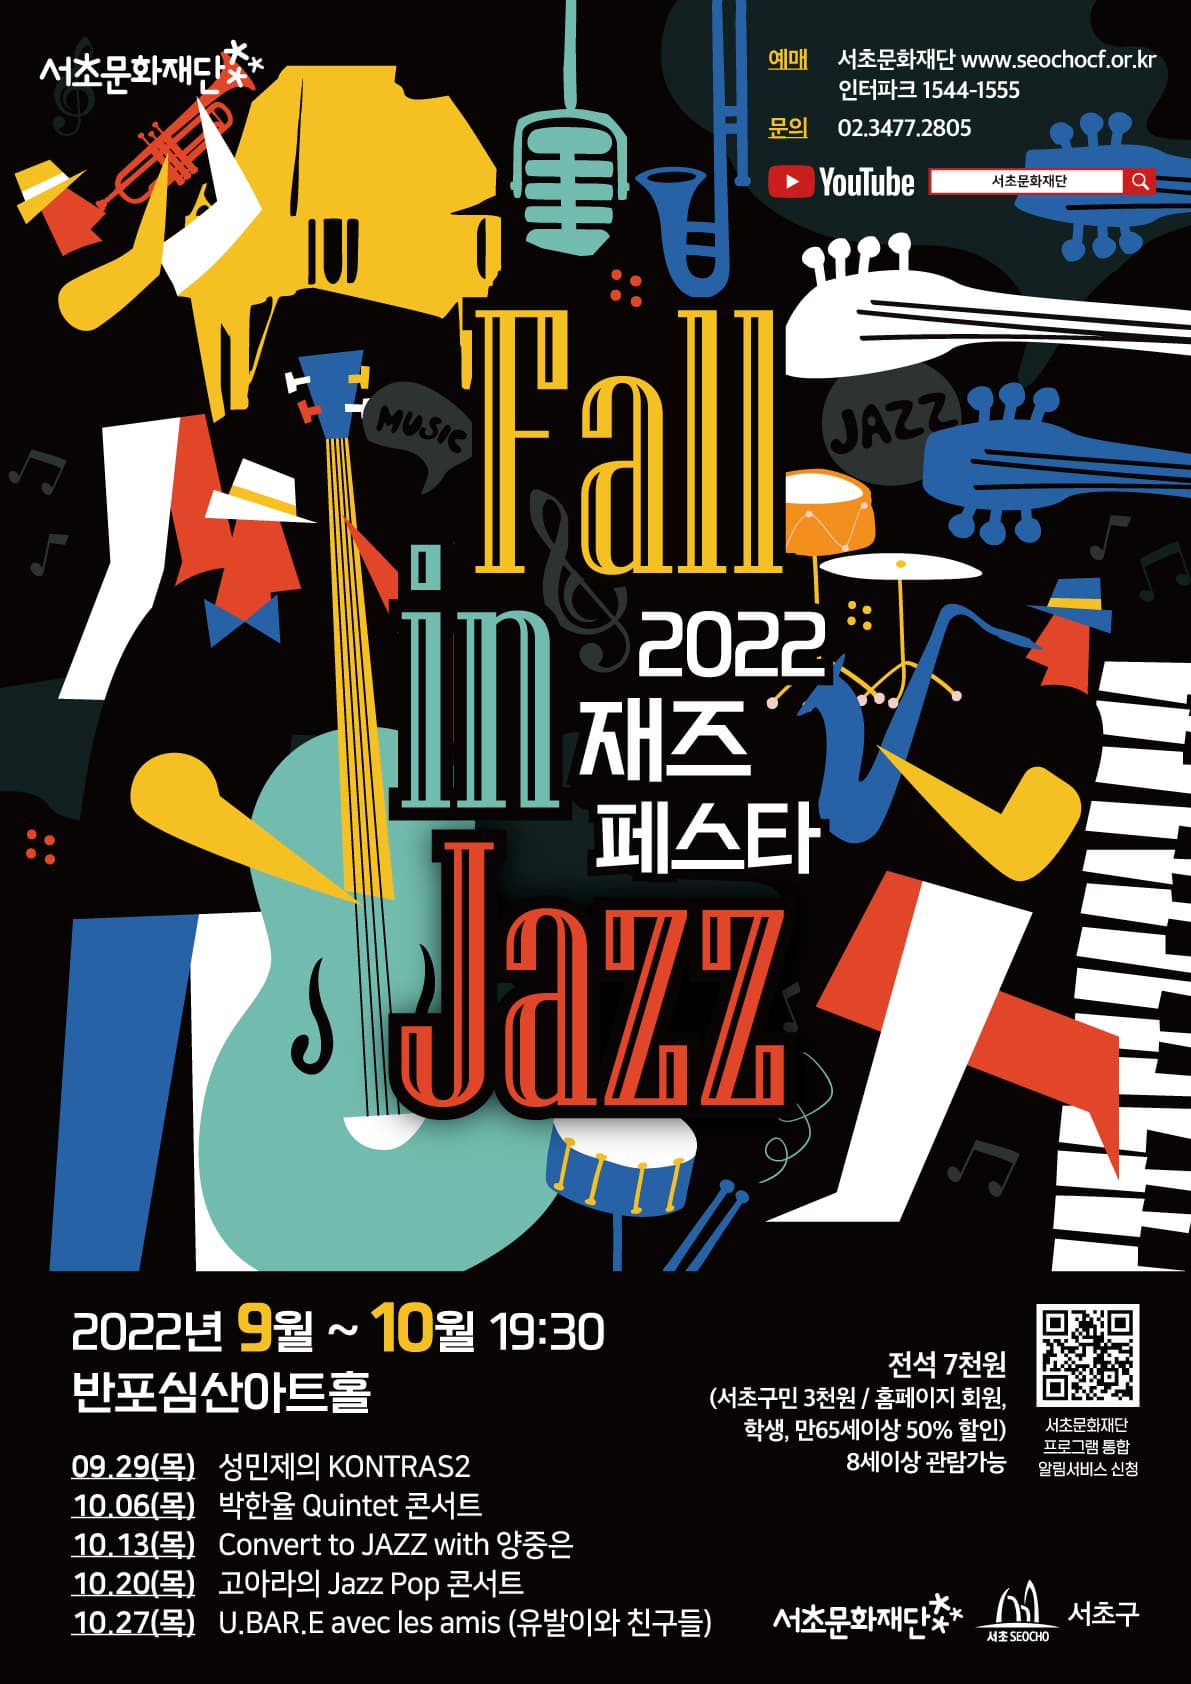 Convert to JAZZ with 양중은